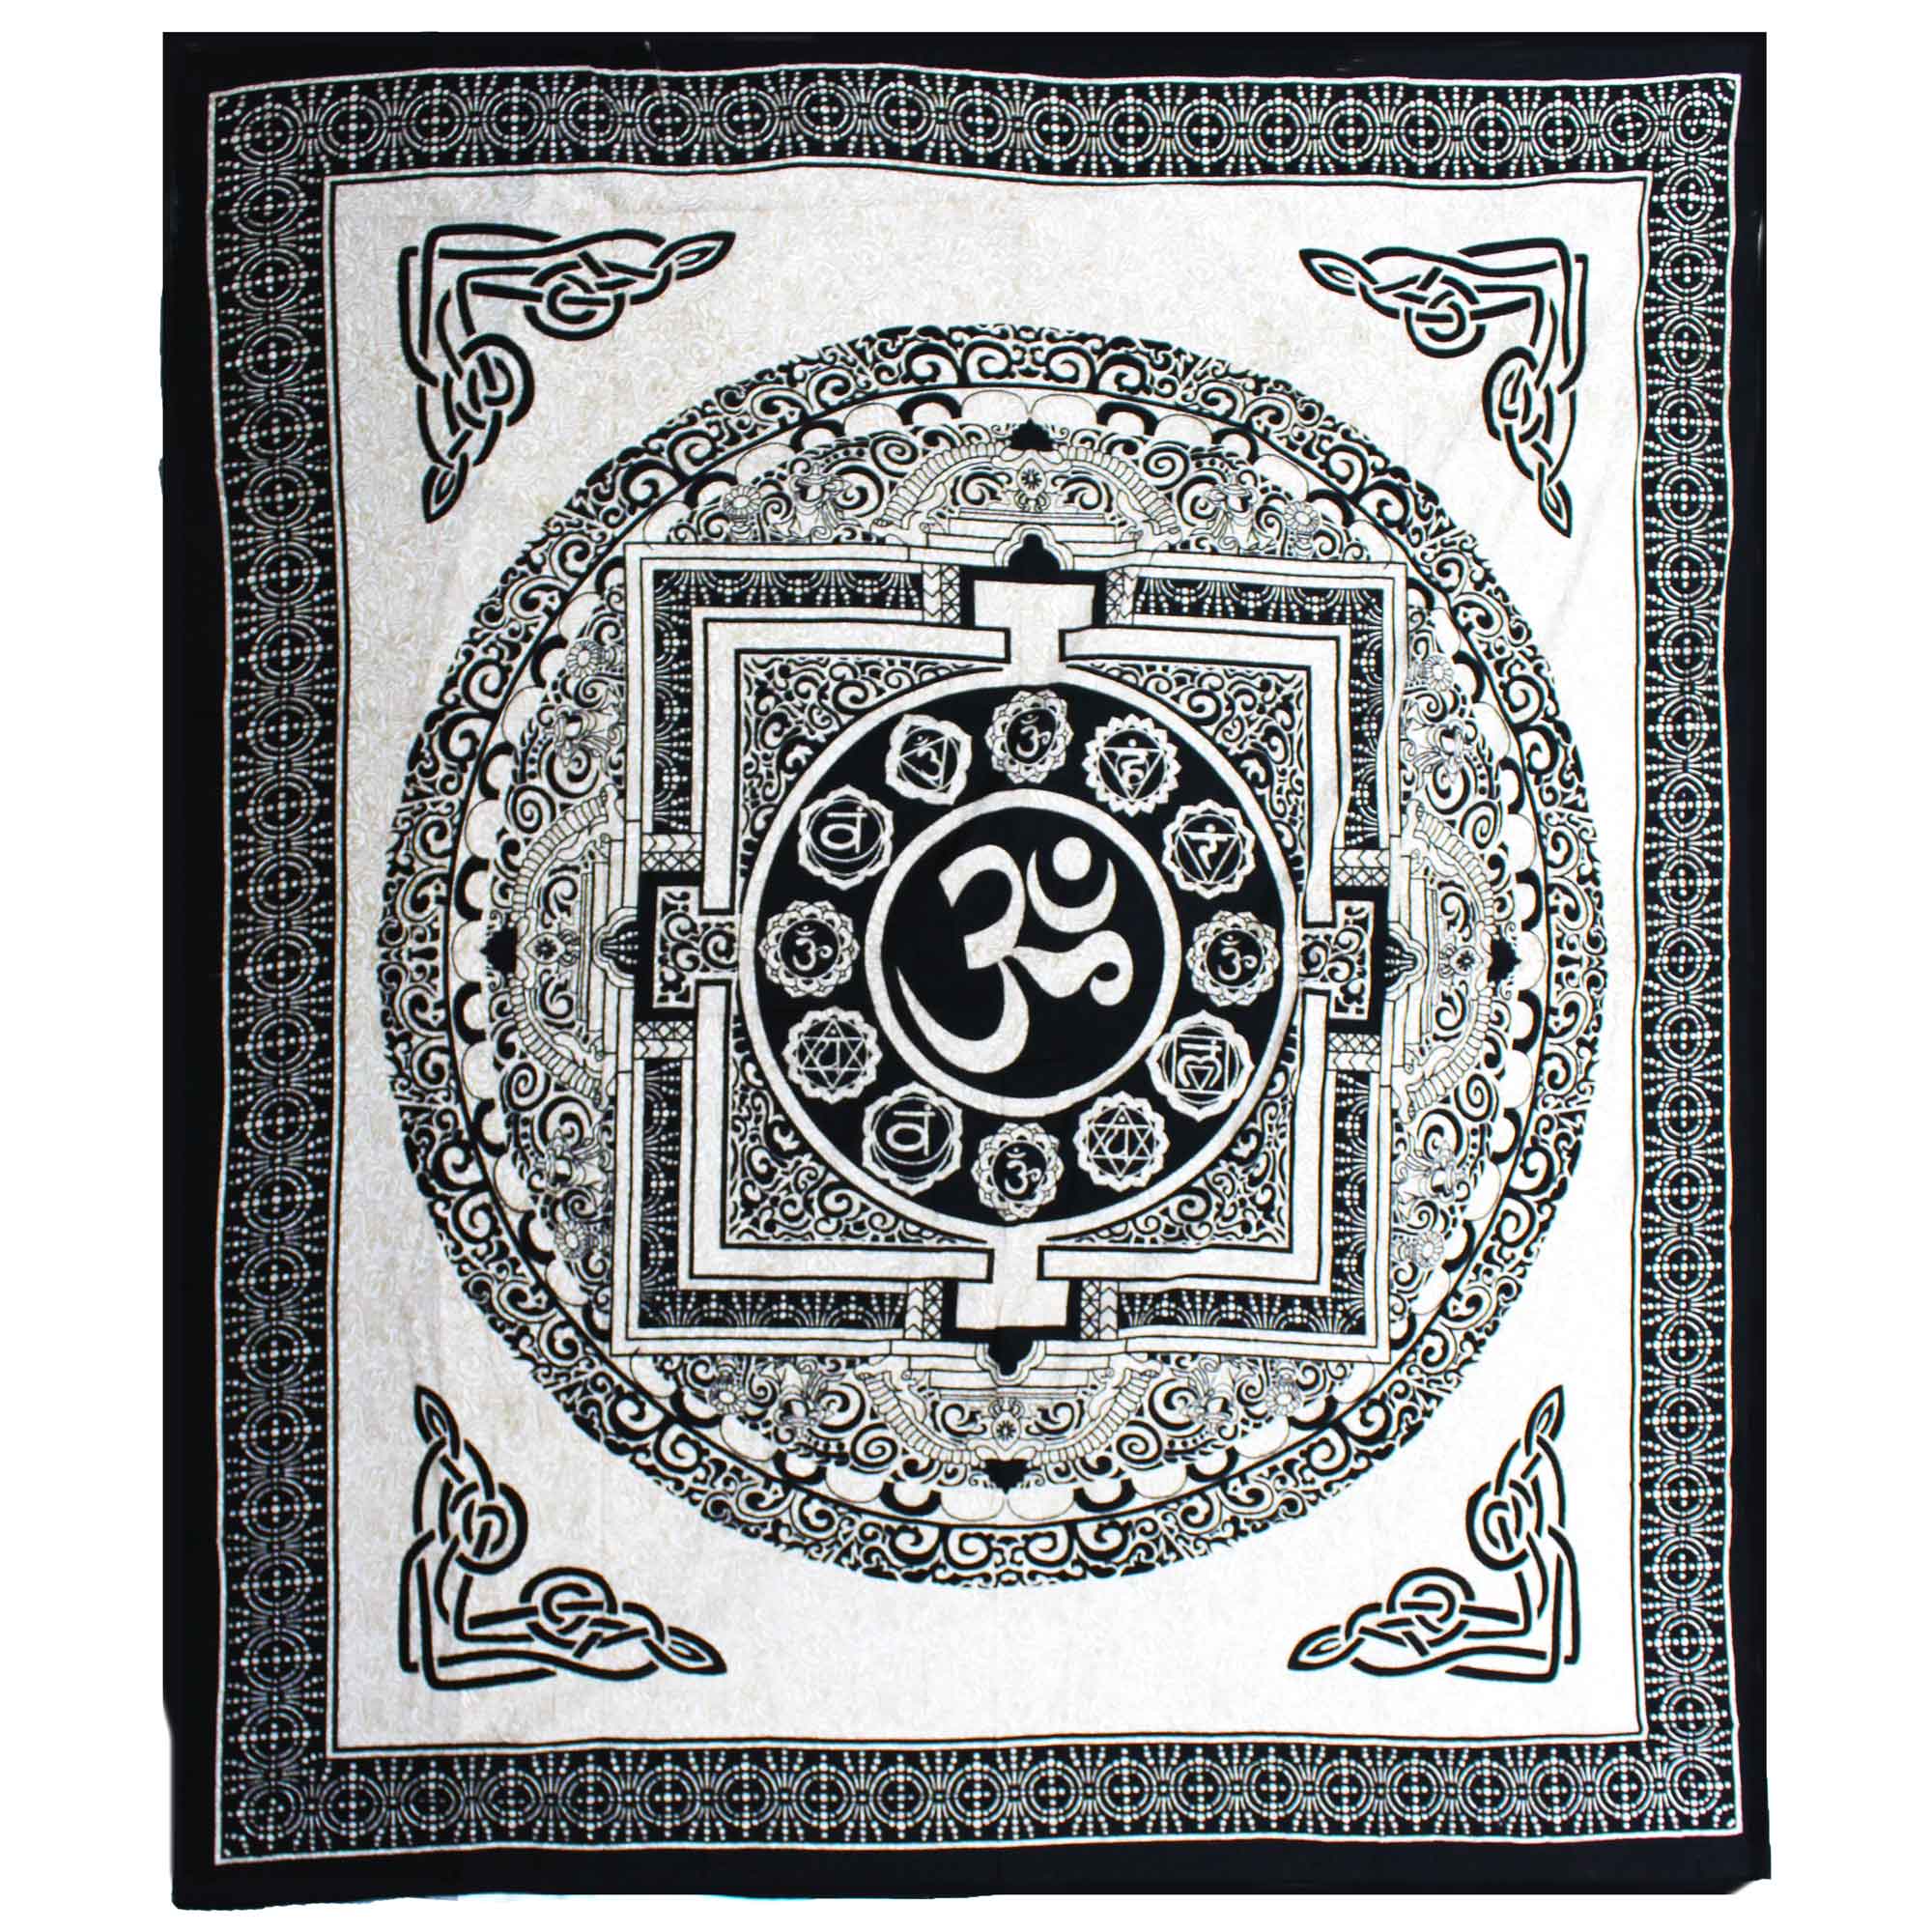 View Double Cotton Bedspread Wall Hanging Mono OM Mandala information